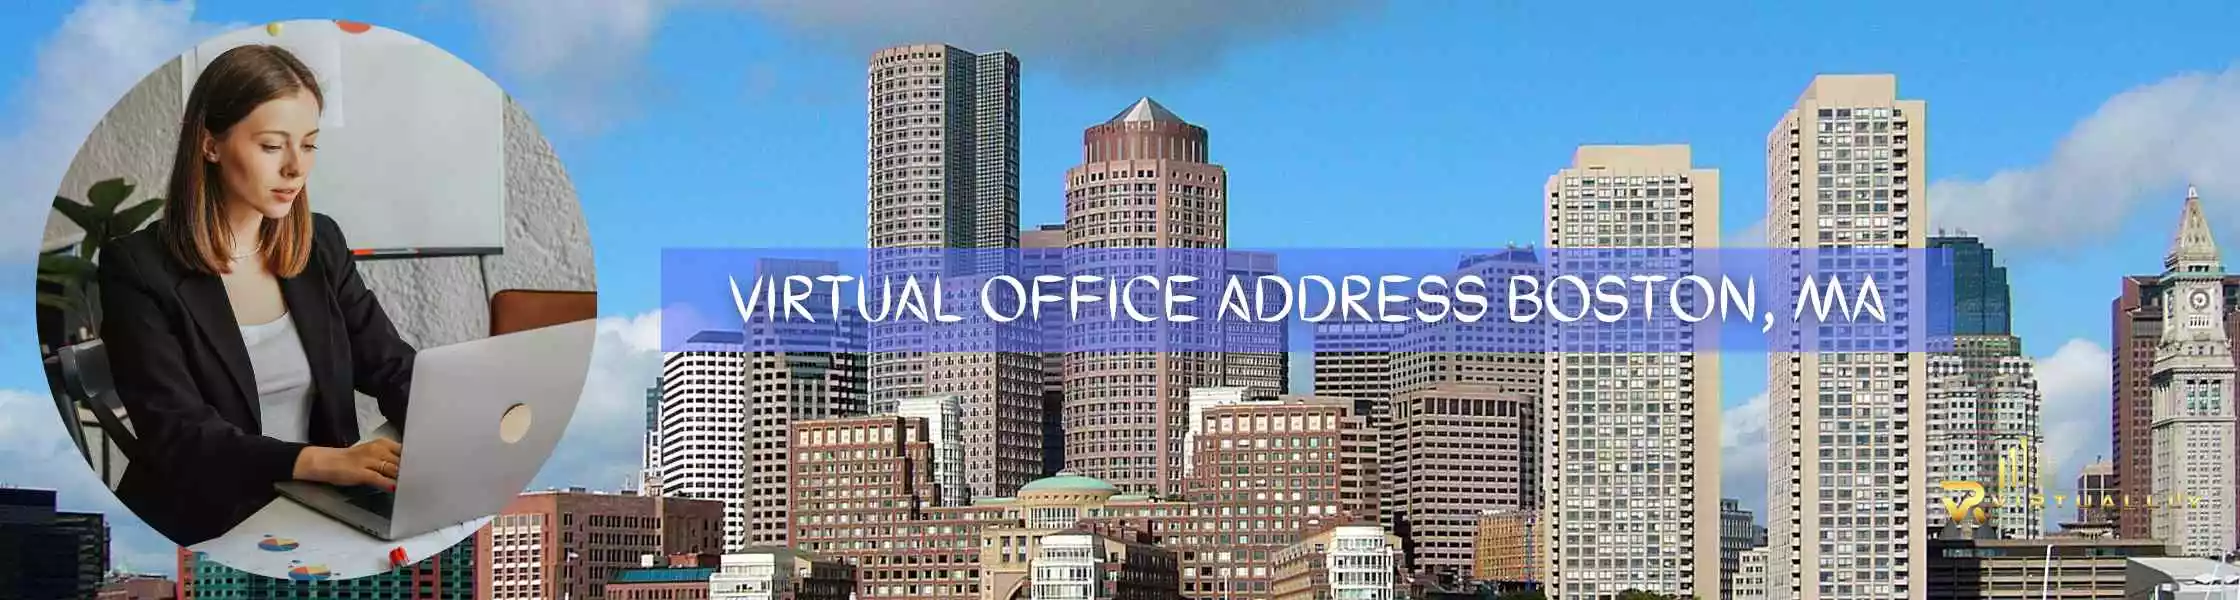 Top-virtual-offices-address-in-boston-ma